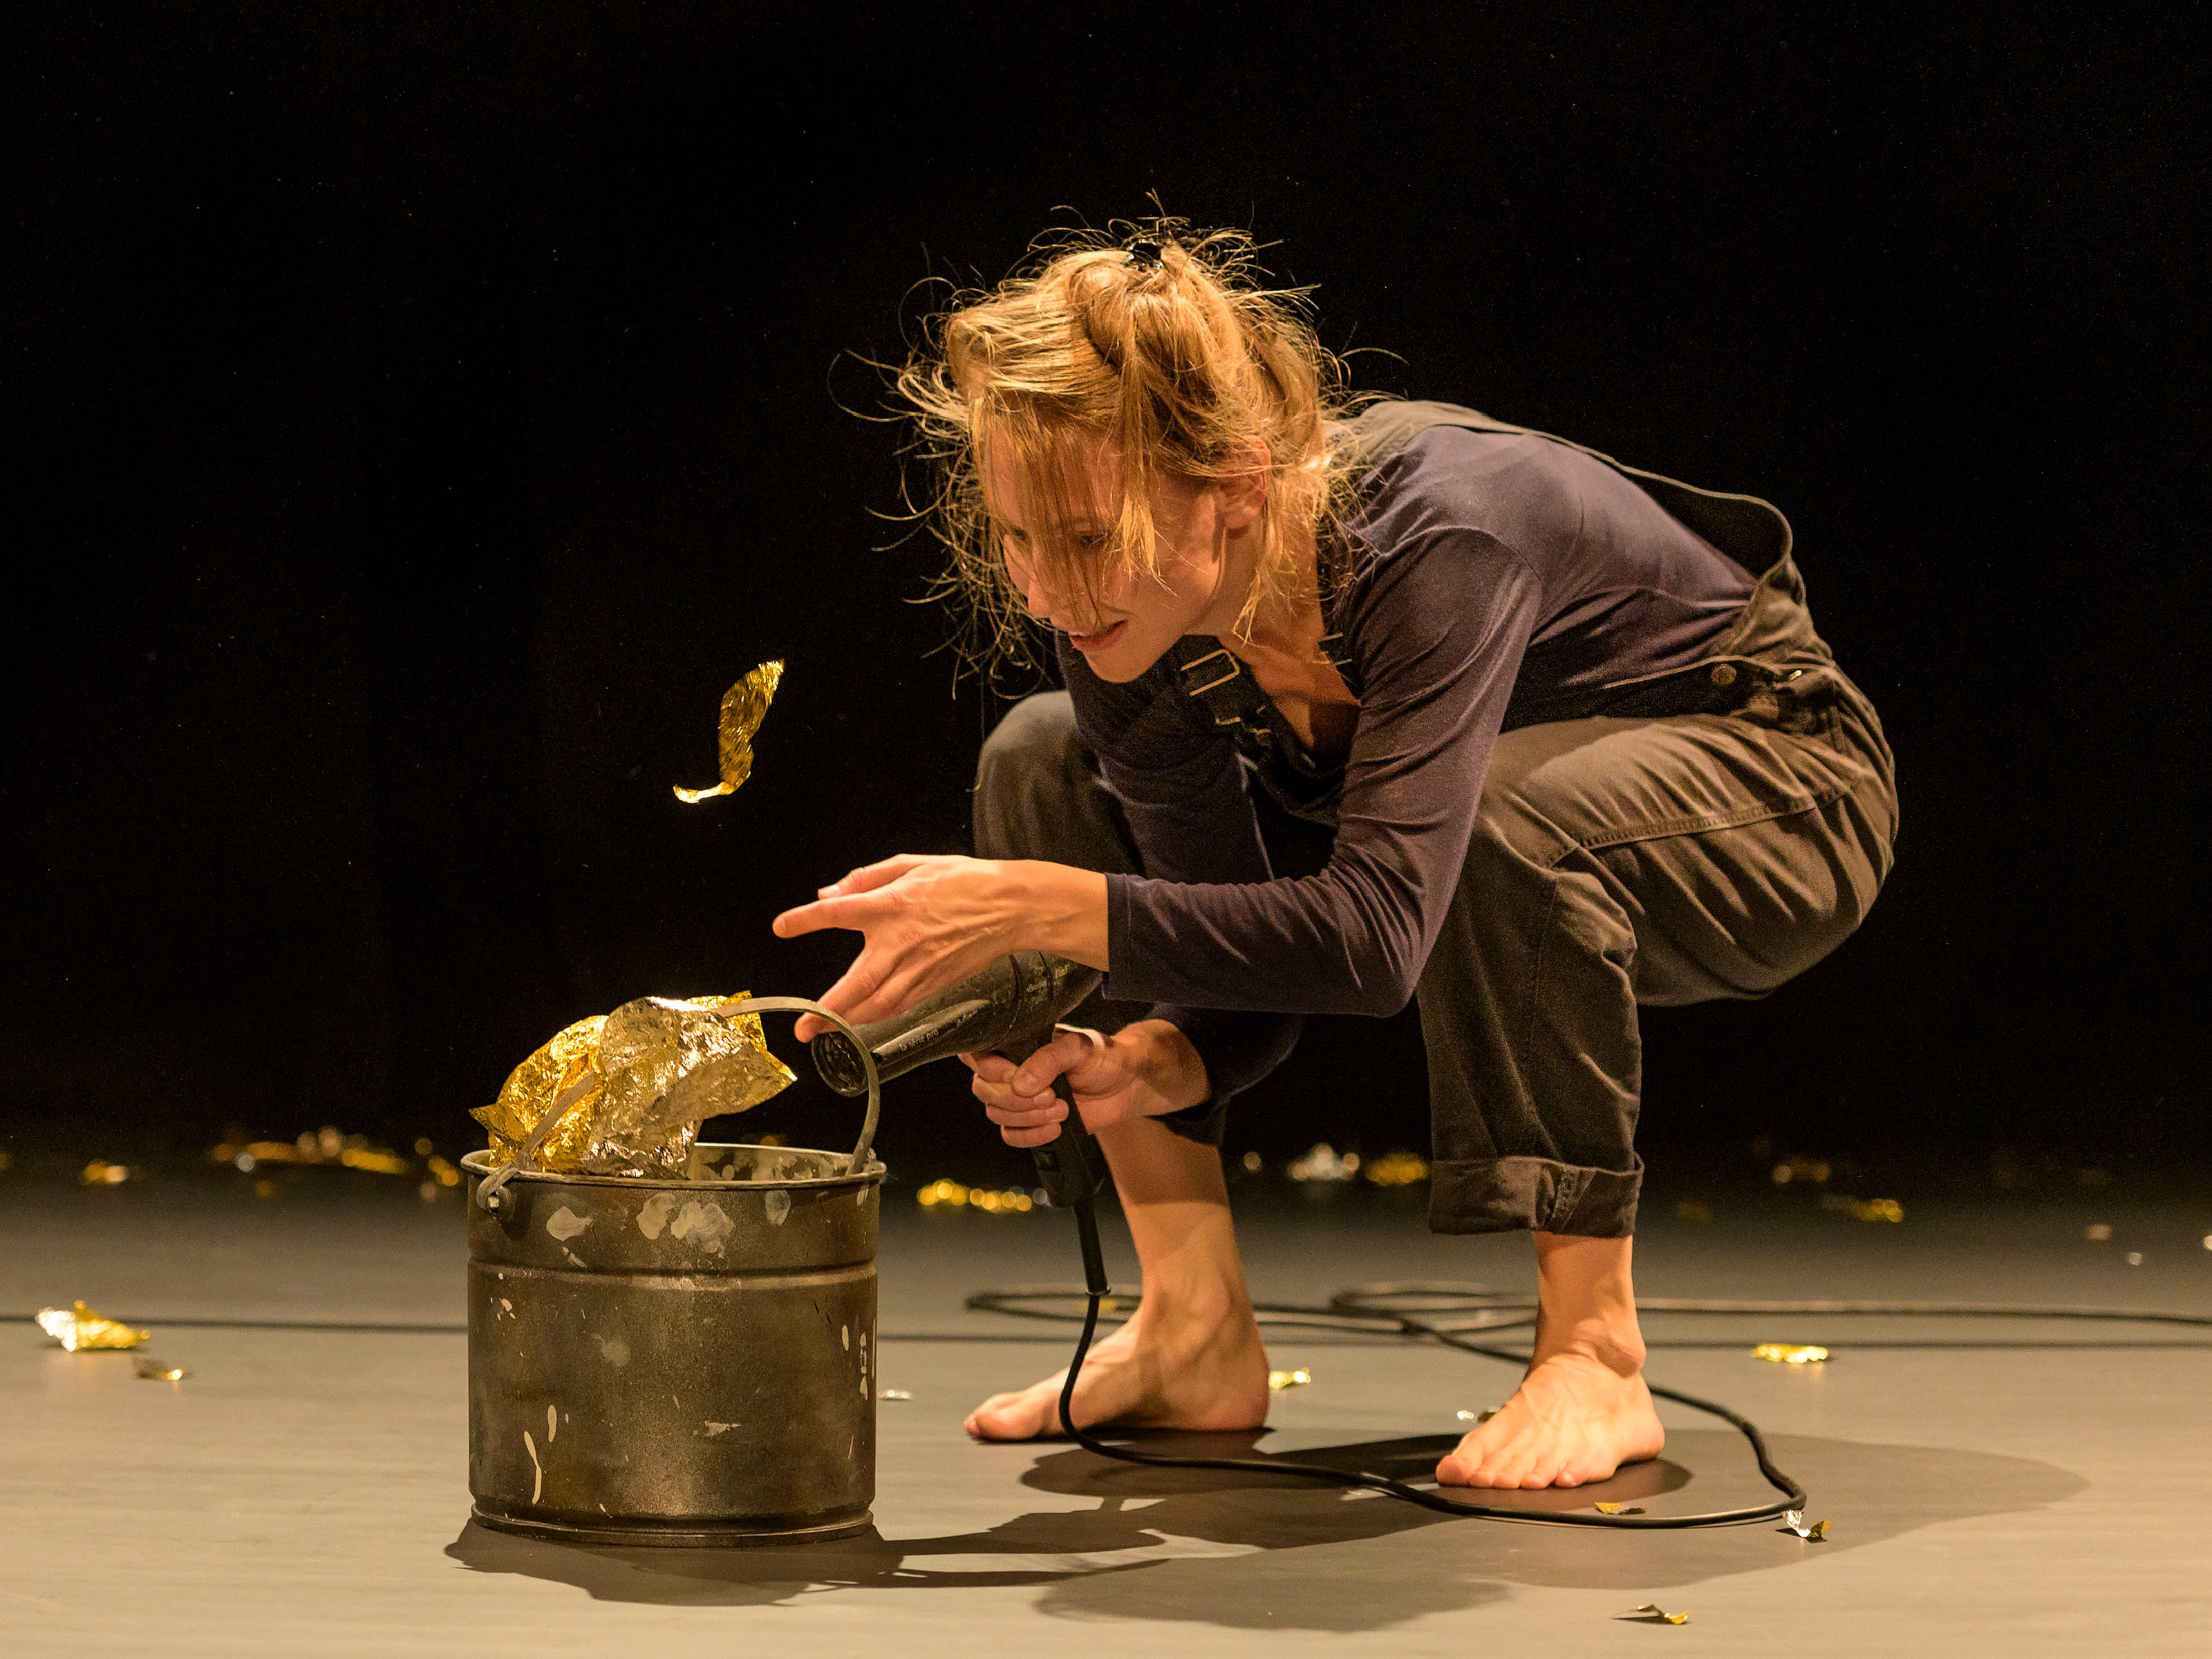 Karoline Hoffmann blows large and small pieces of gold foil out of a metal bucket with a hair dryer.